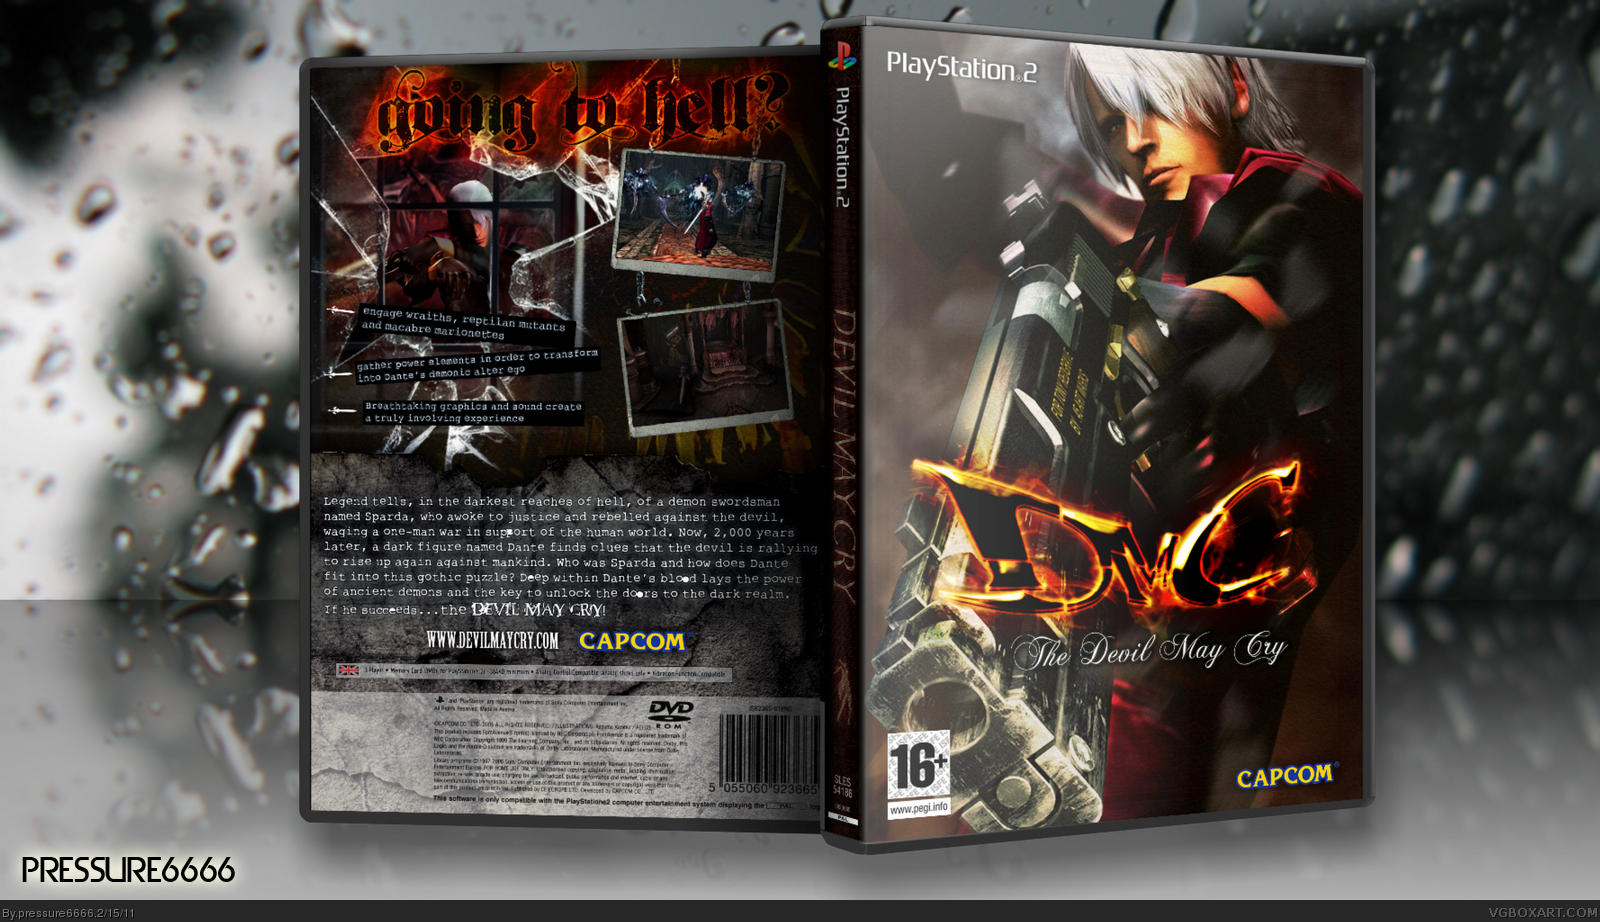 Devil May Cry box cover